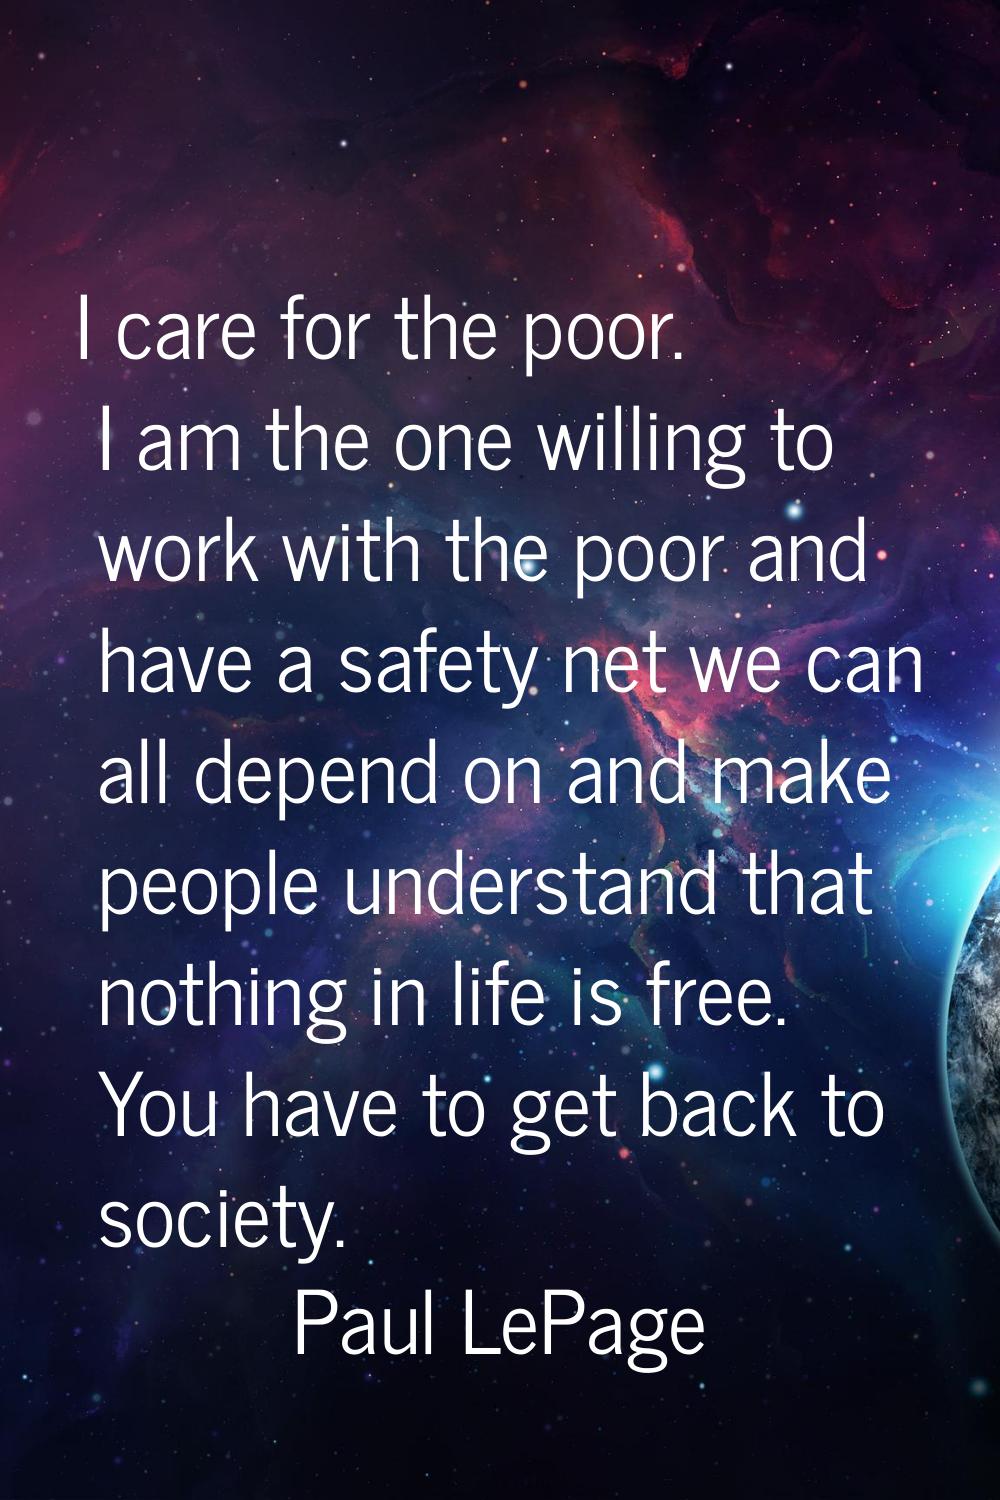 I care for the poor. I am the one willing to work with the poor and have a safety net we can all de